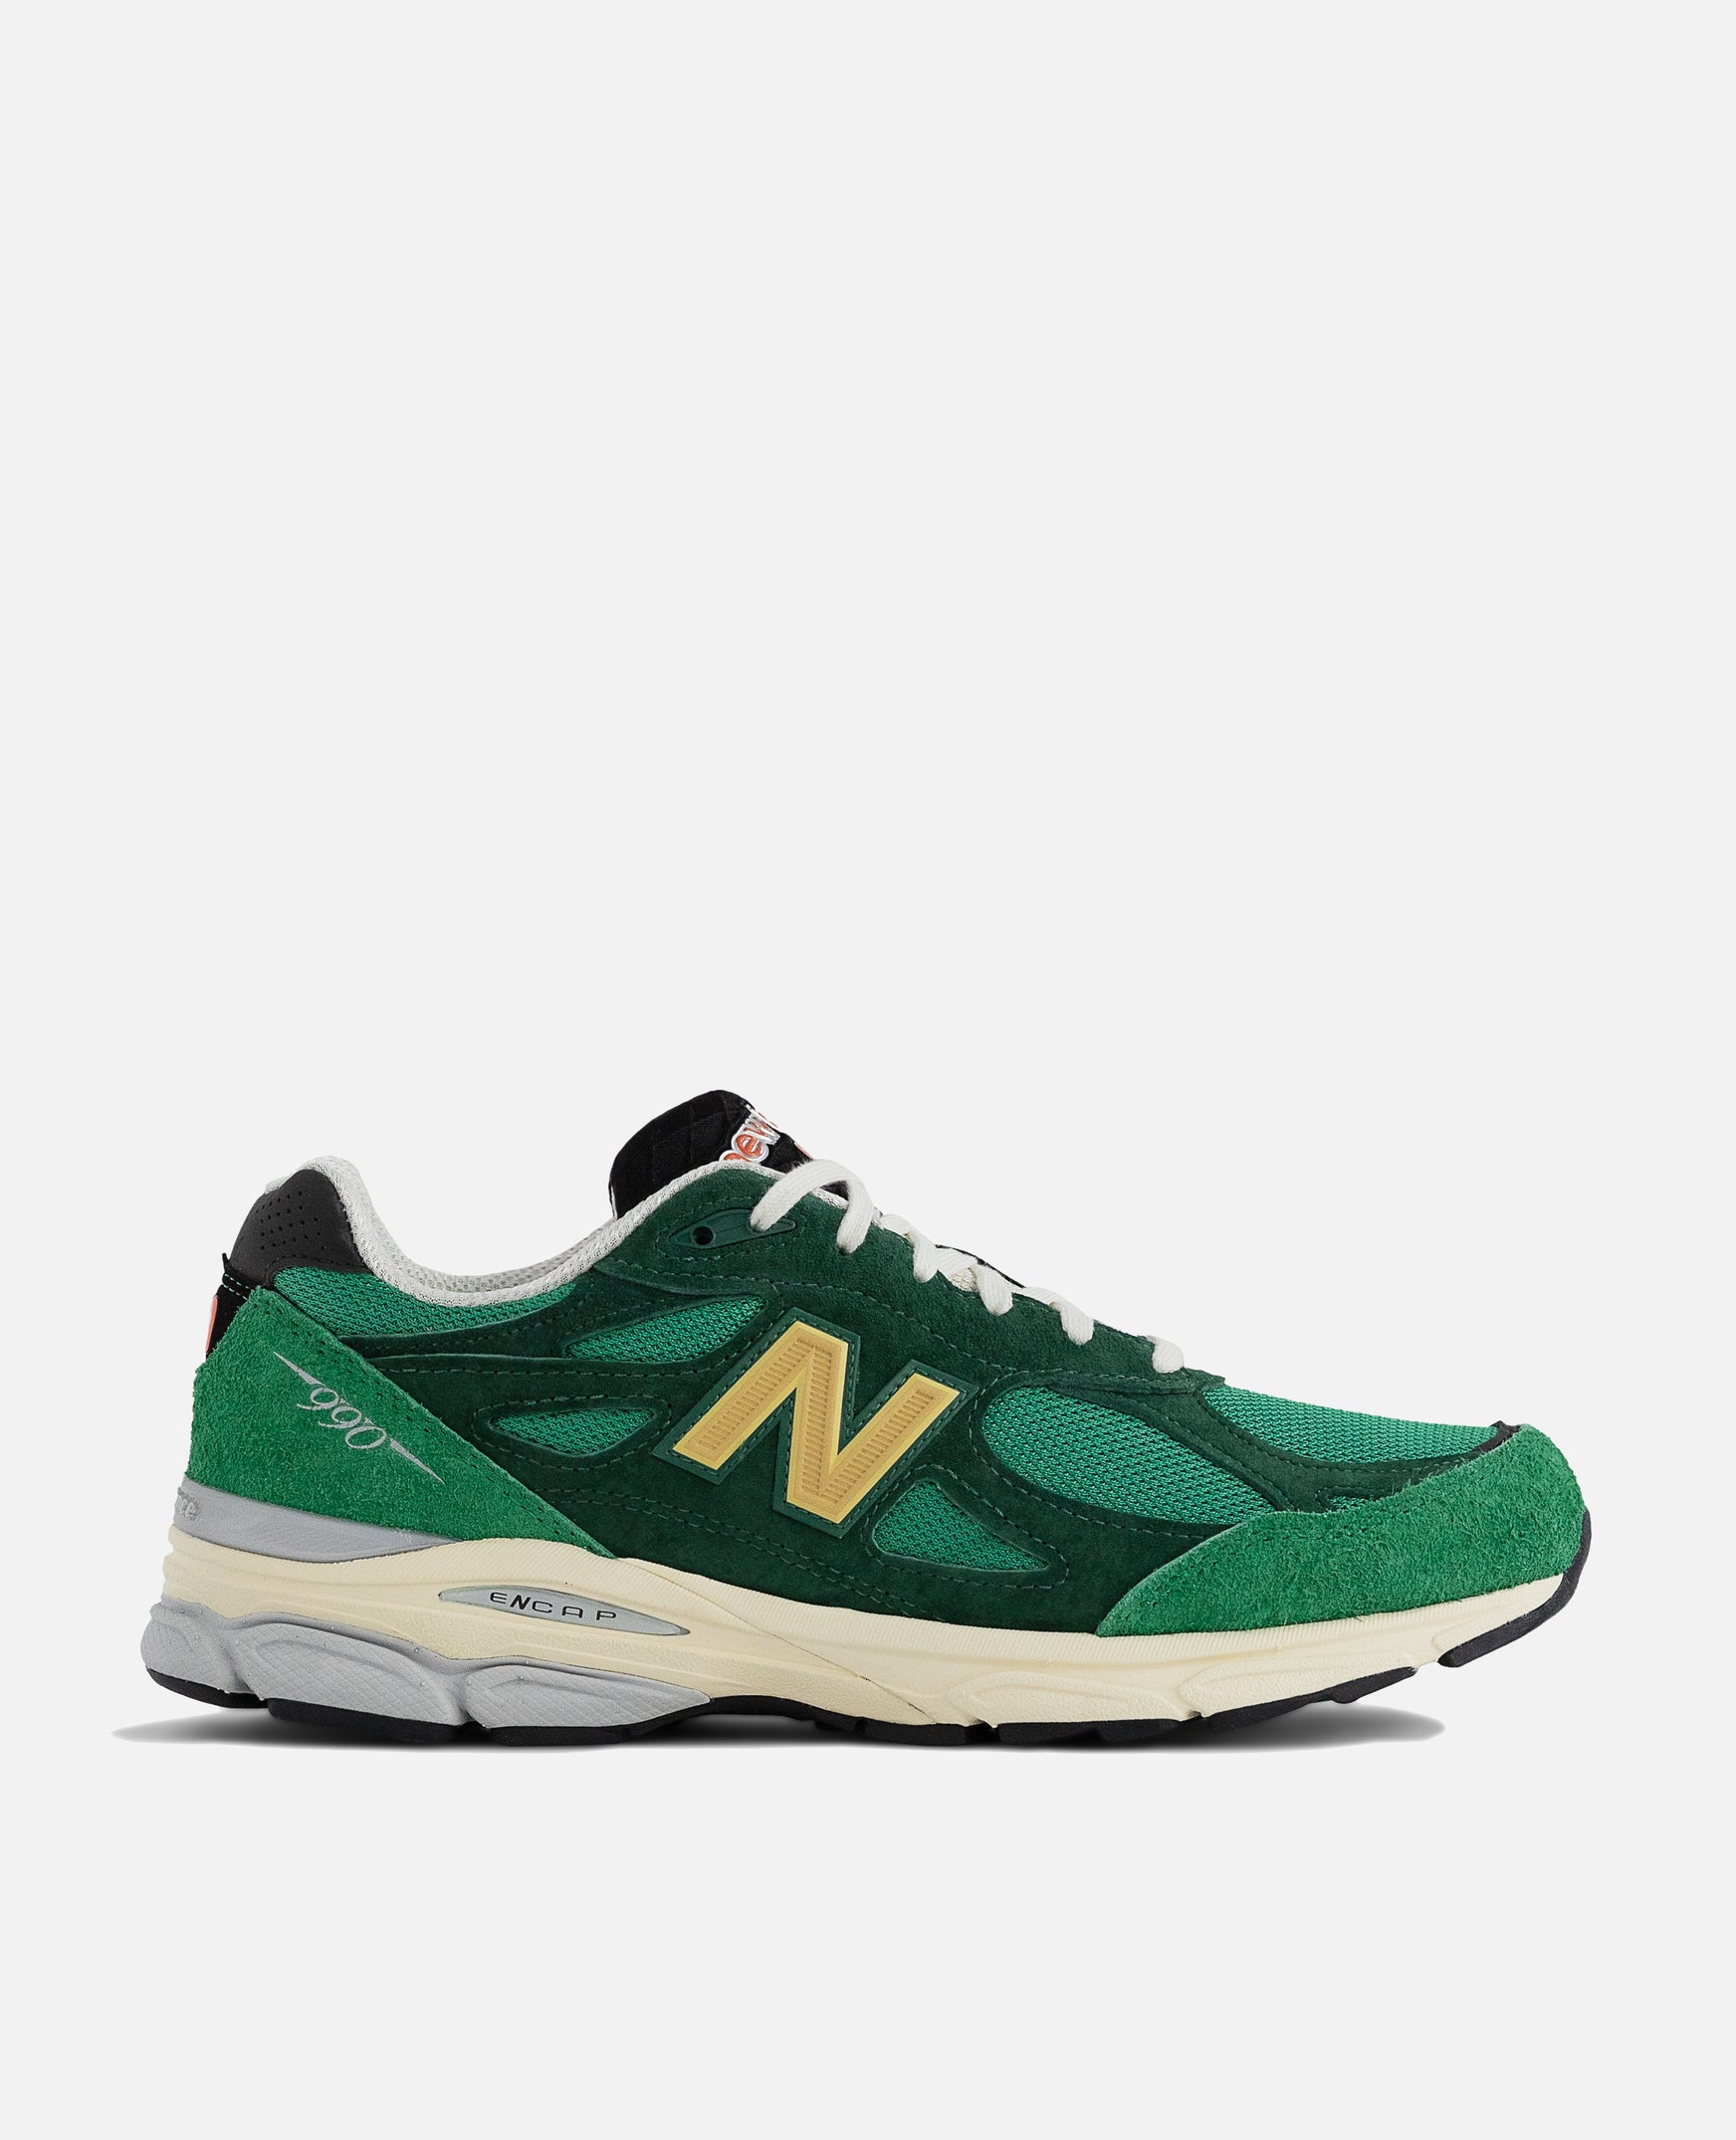 New Balance 990v3 Made In USA (Green/Yellow)